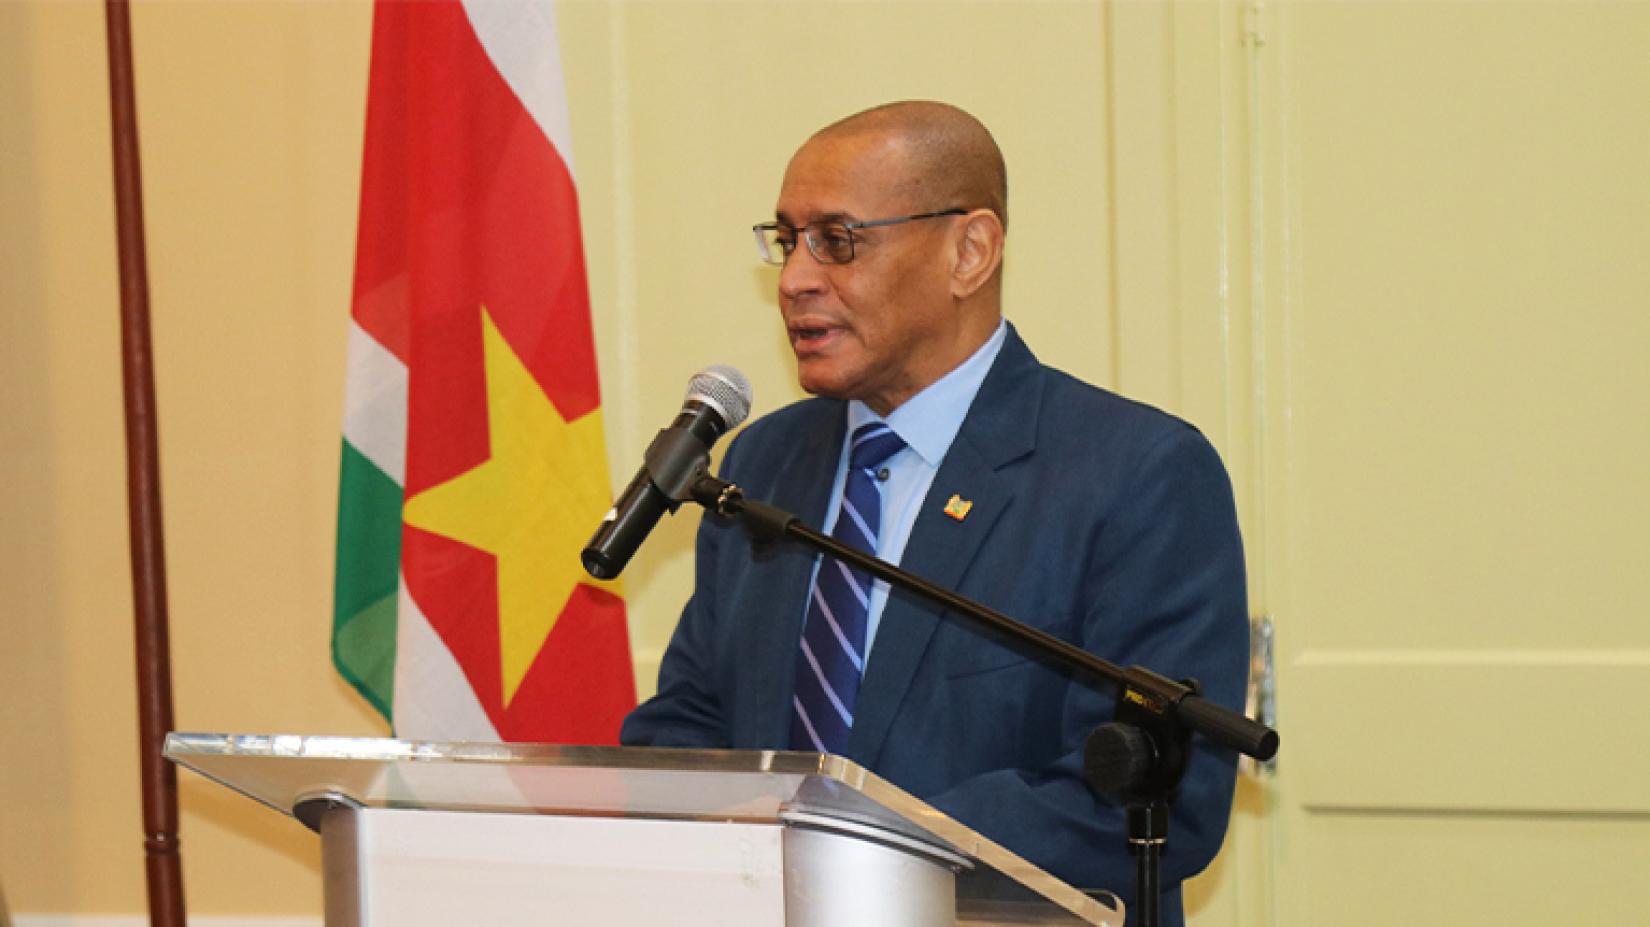 Minister of Labour Suriname, Steven Mac Andrew